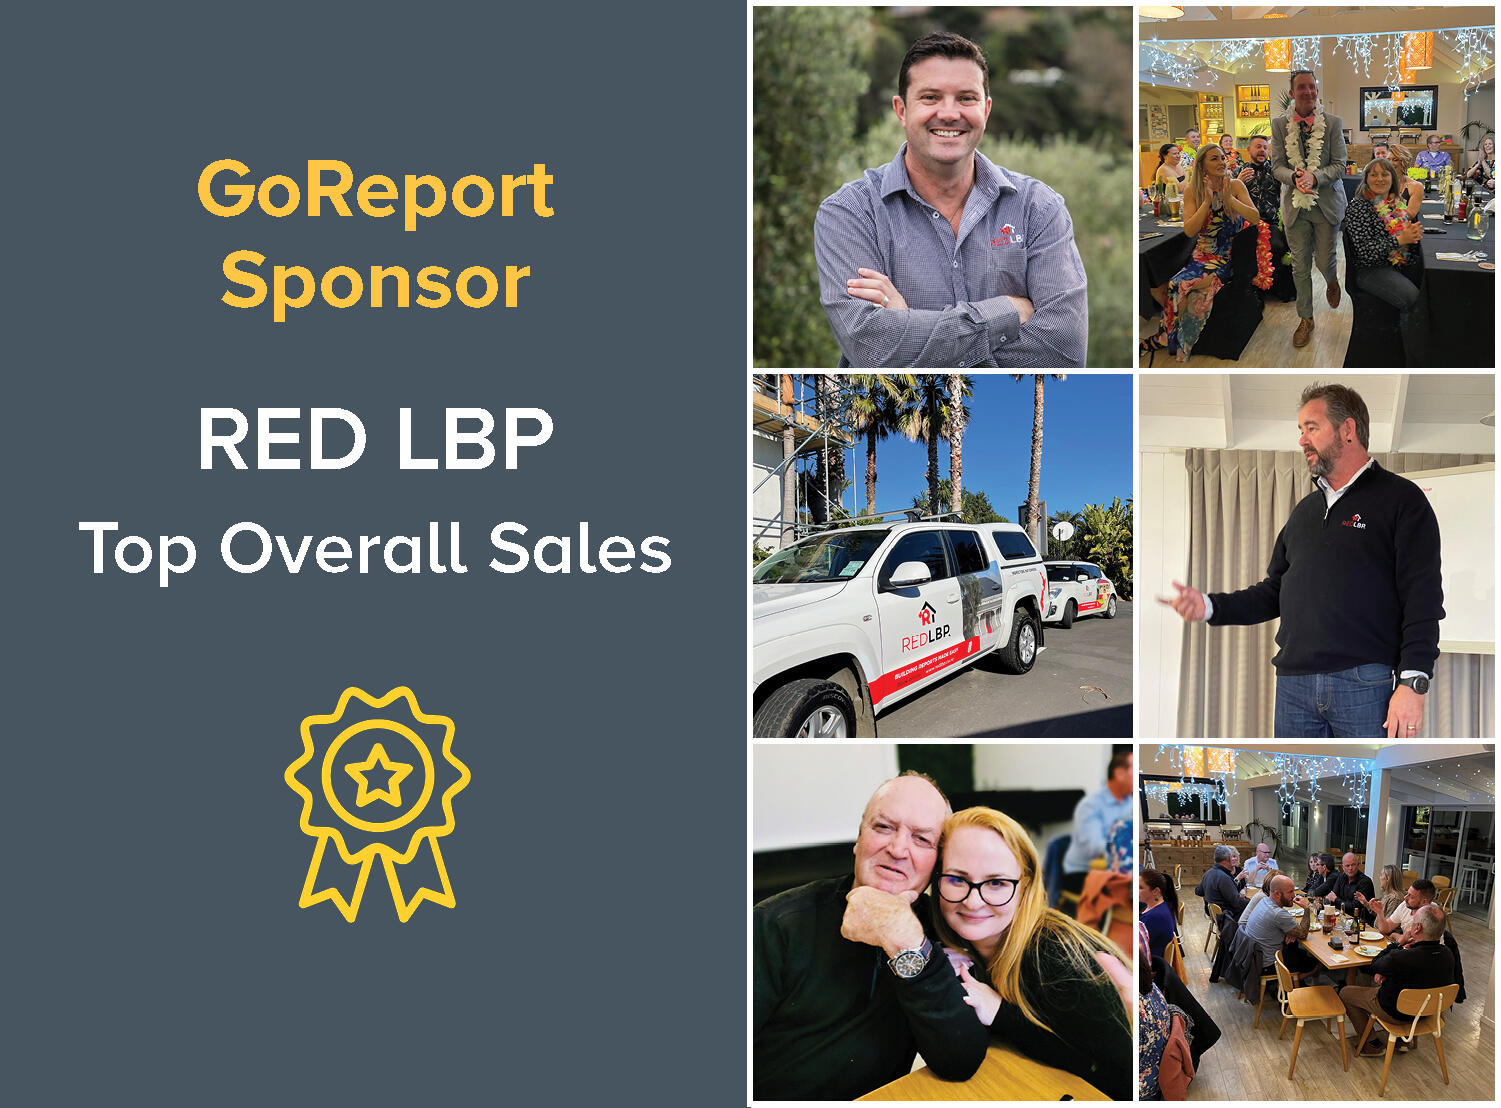 GoReport Sponsor Red LBP award at their annual conference in Waiheke Island, New Zealand